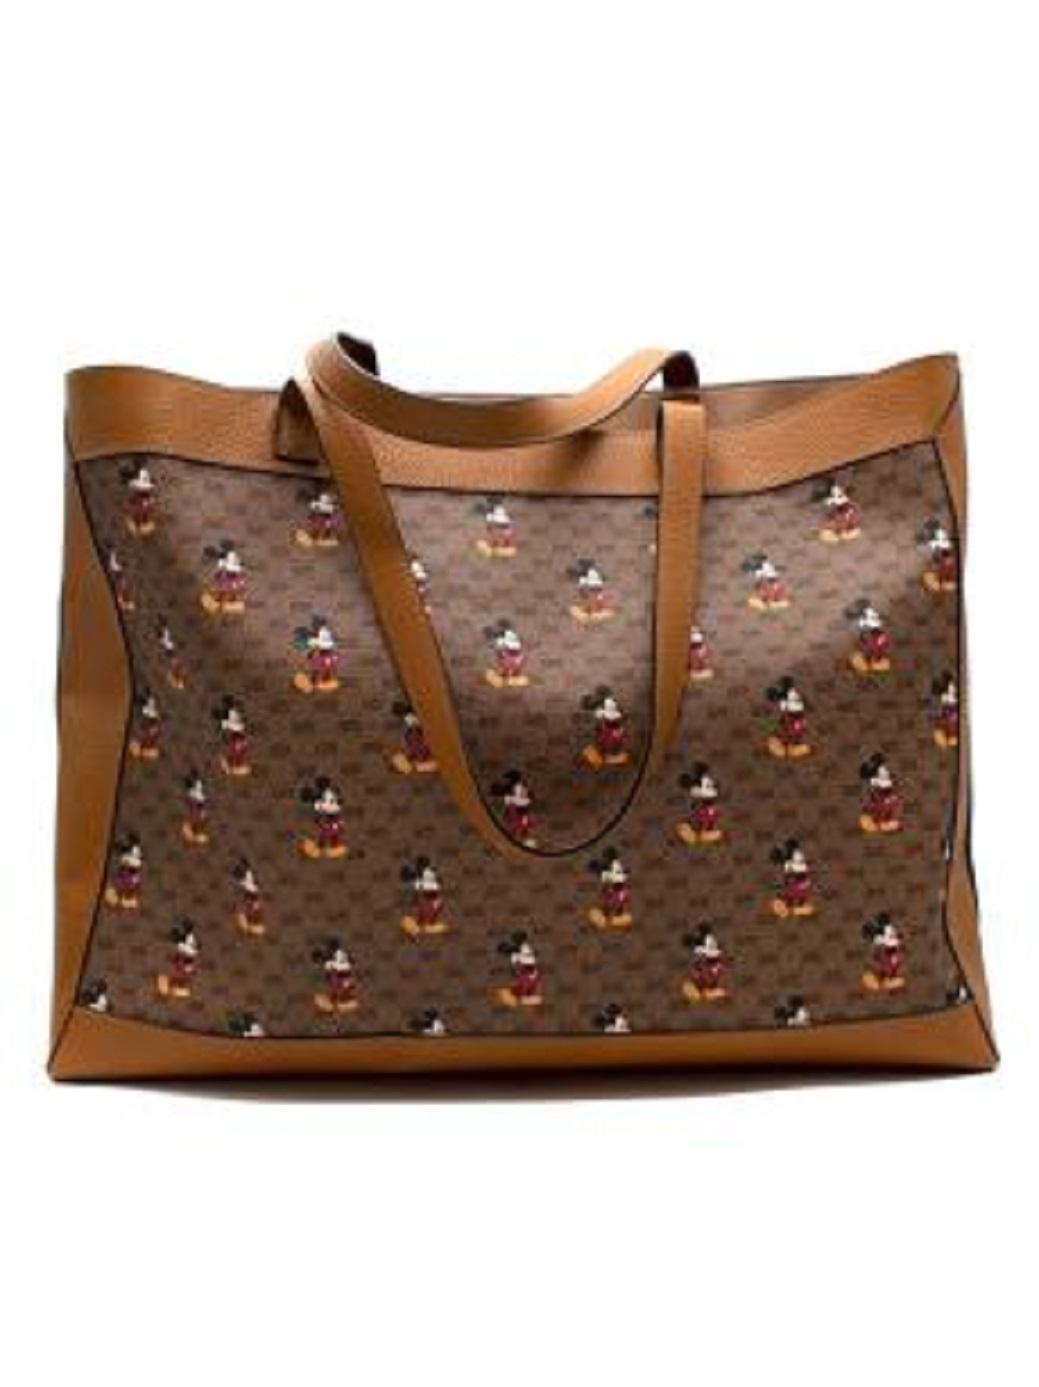 Disney X Gucci Tote Bag In Good Condition For Sale In London, GB